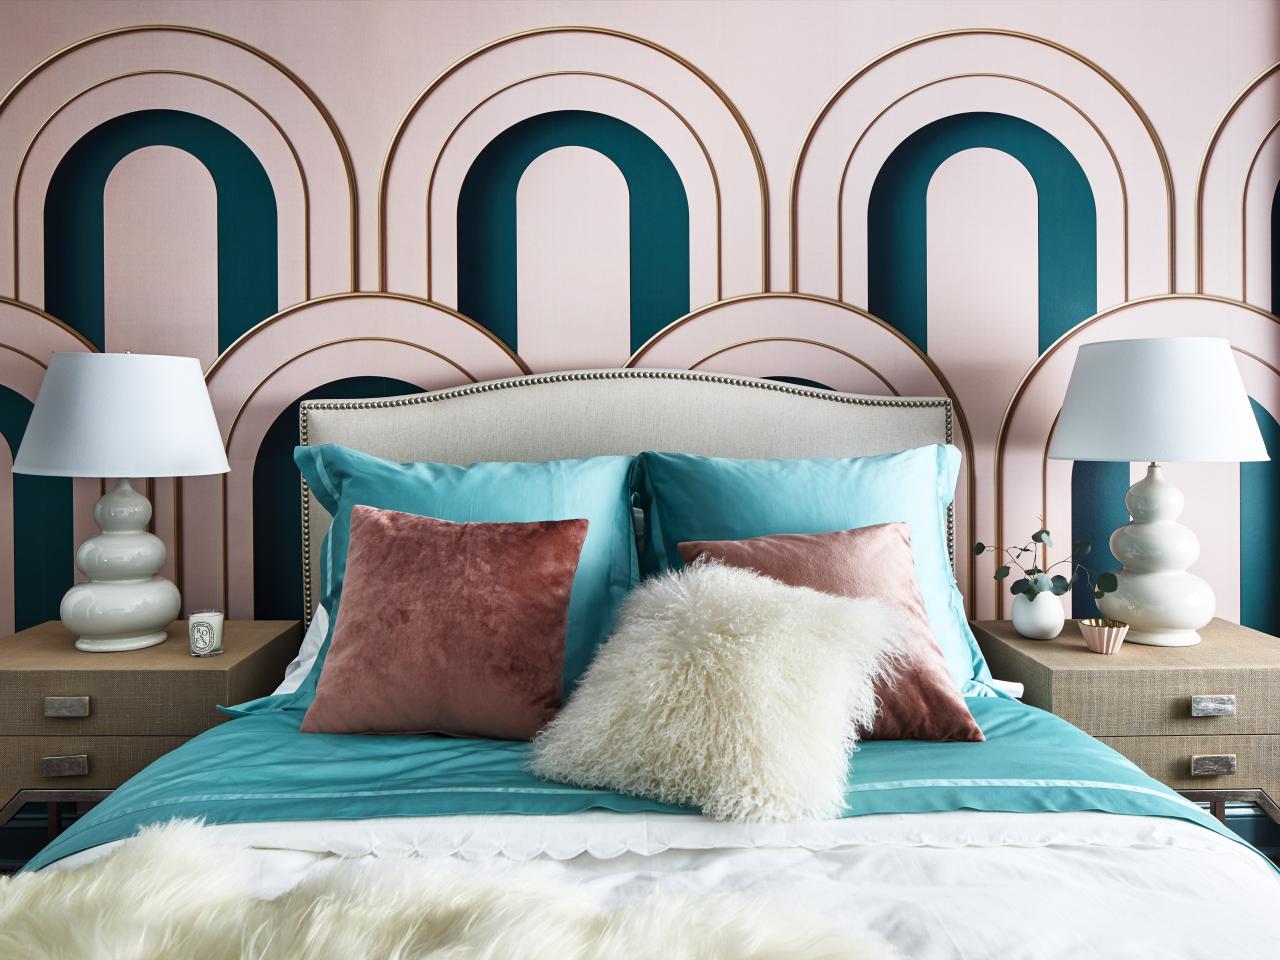 How to Decorate Art Deco 